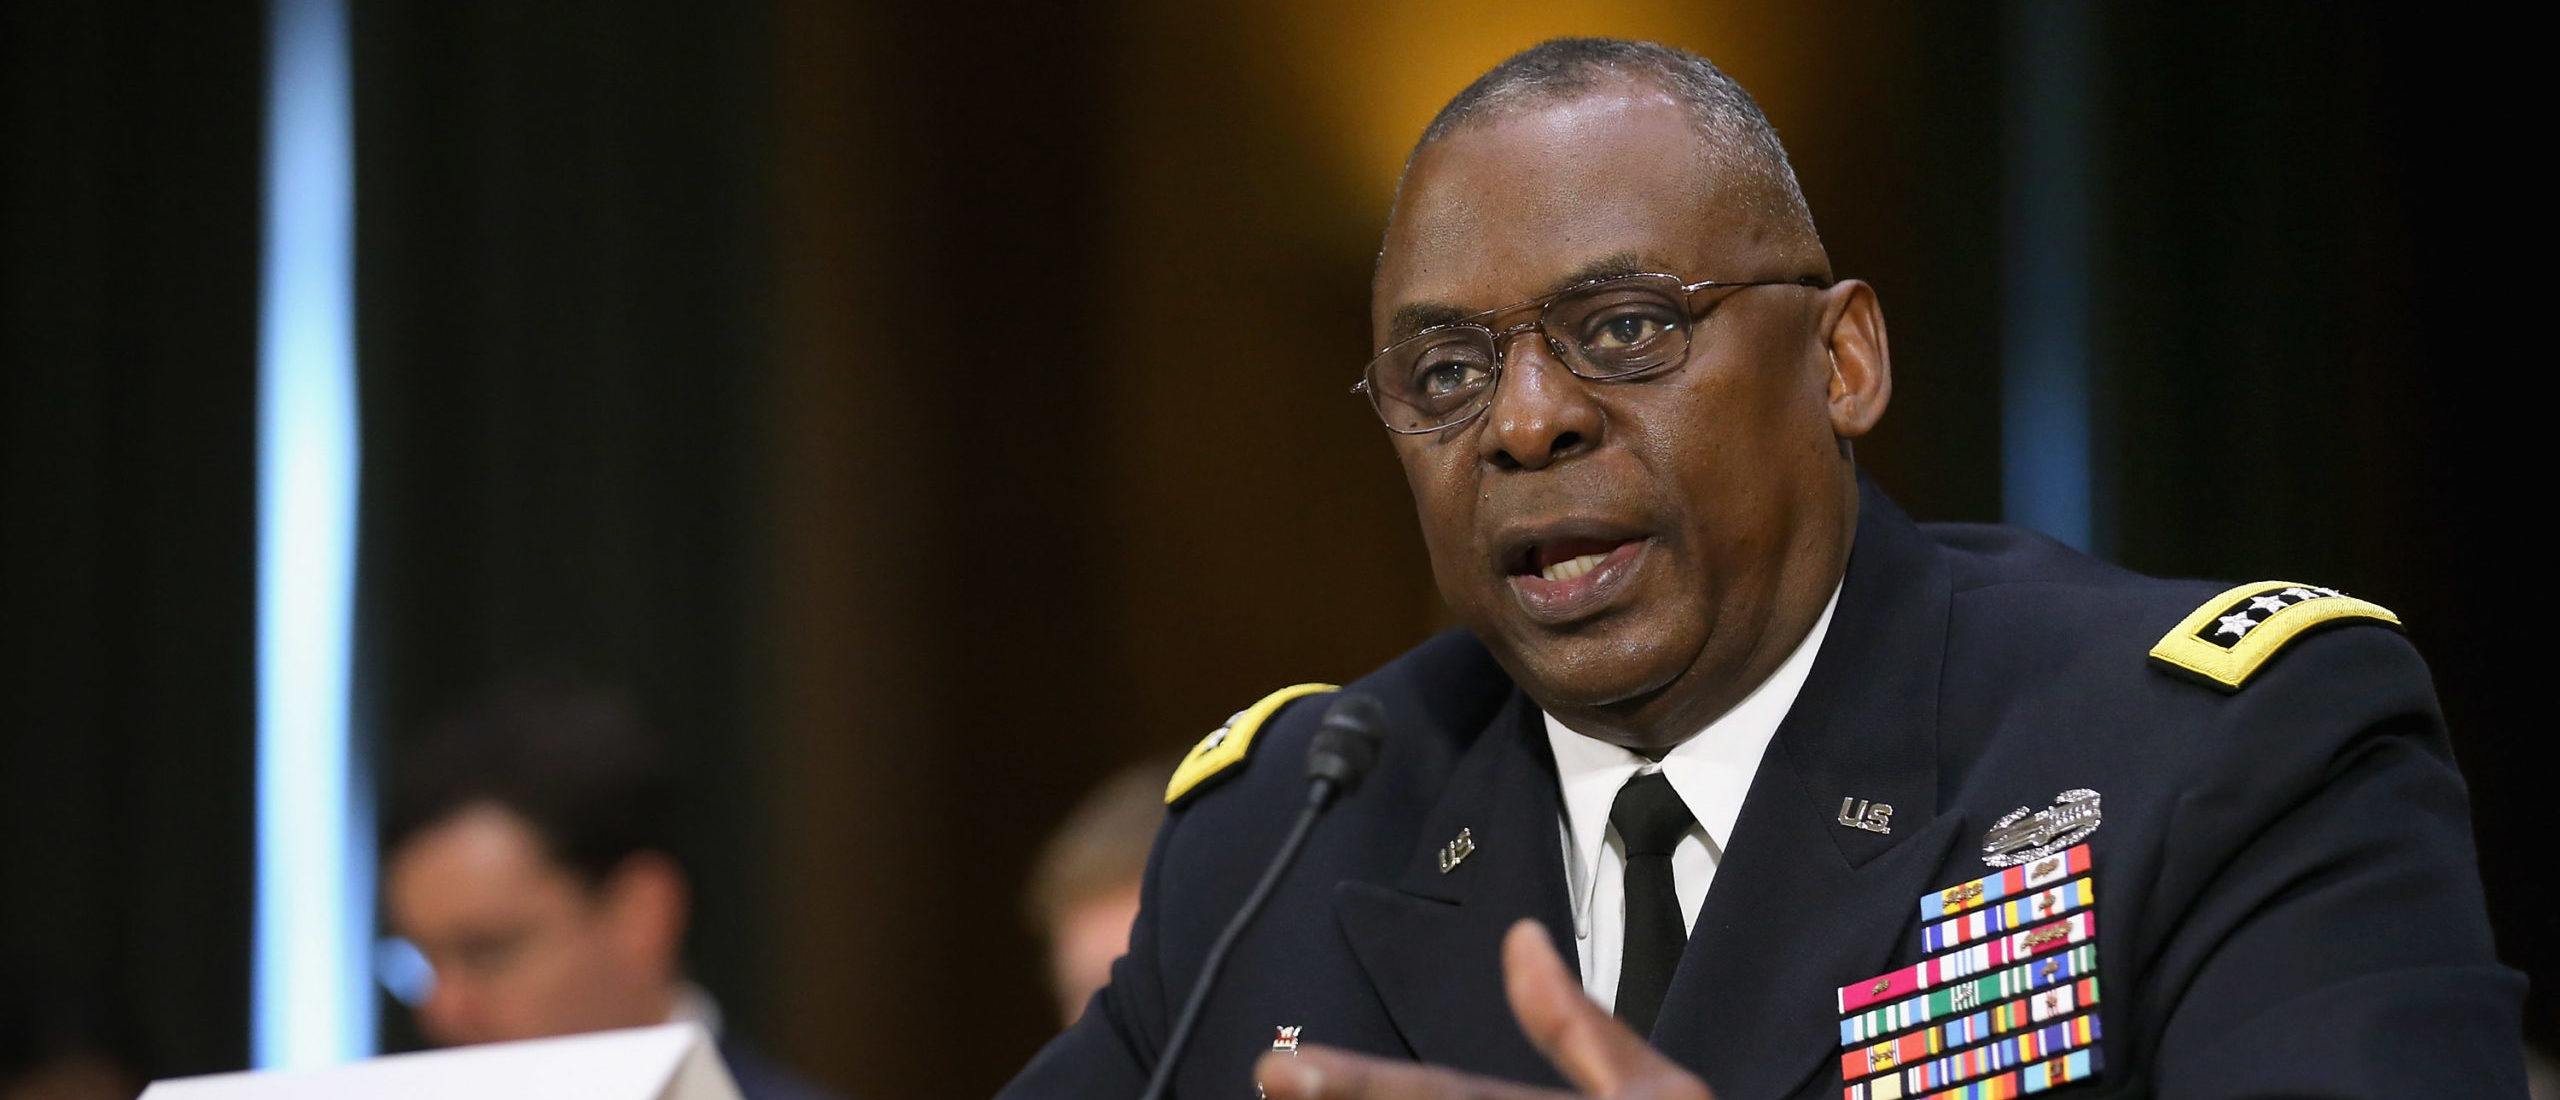 Gen. Lloyd Austin III, commander of U.S. Central Command, testifies before the Senate Armed Services Committee. (Photo by Chip Somodevilla/Getty Images)